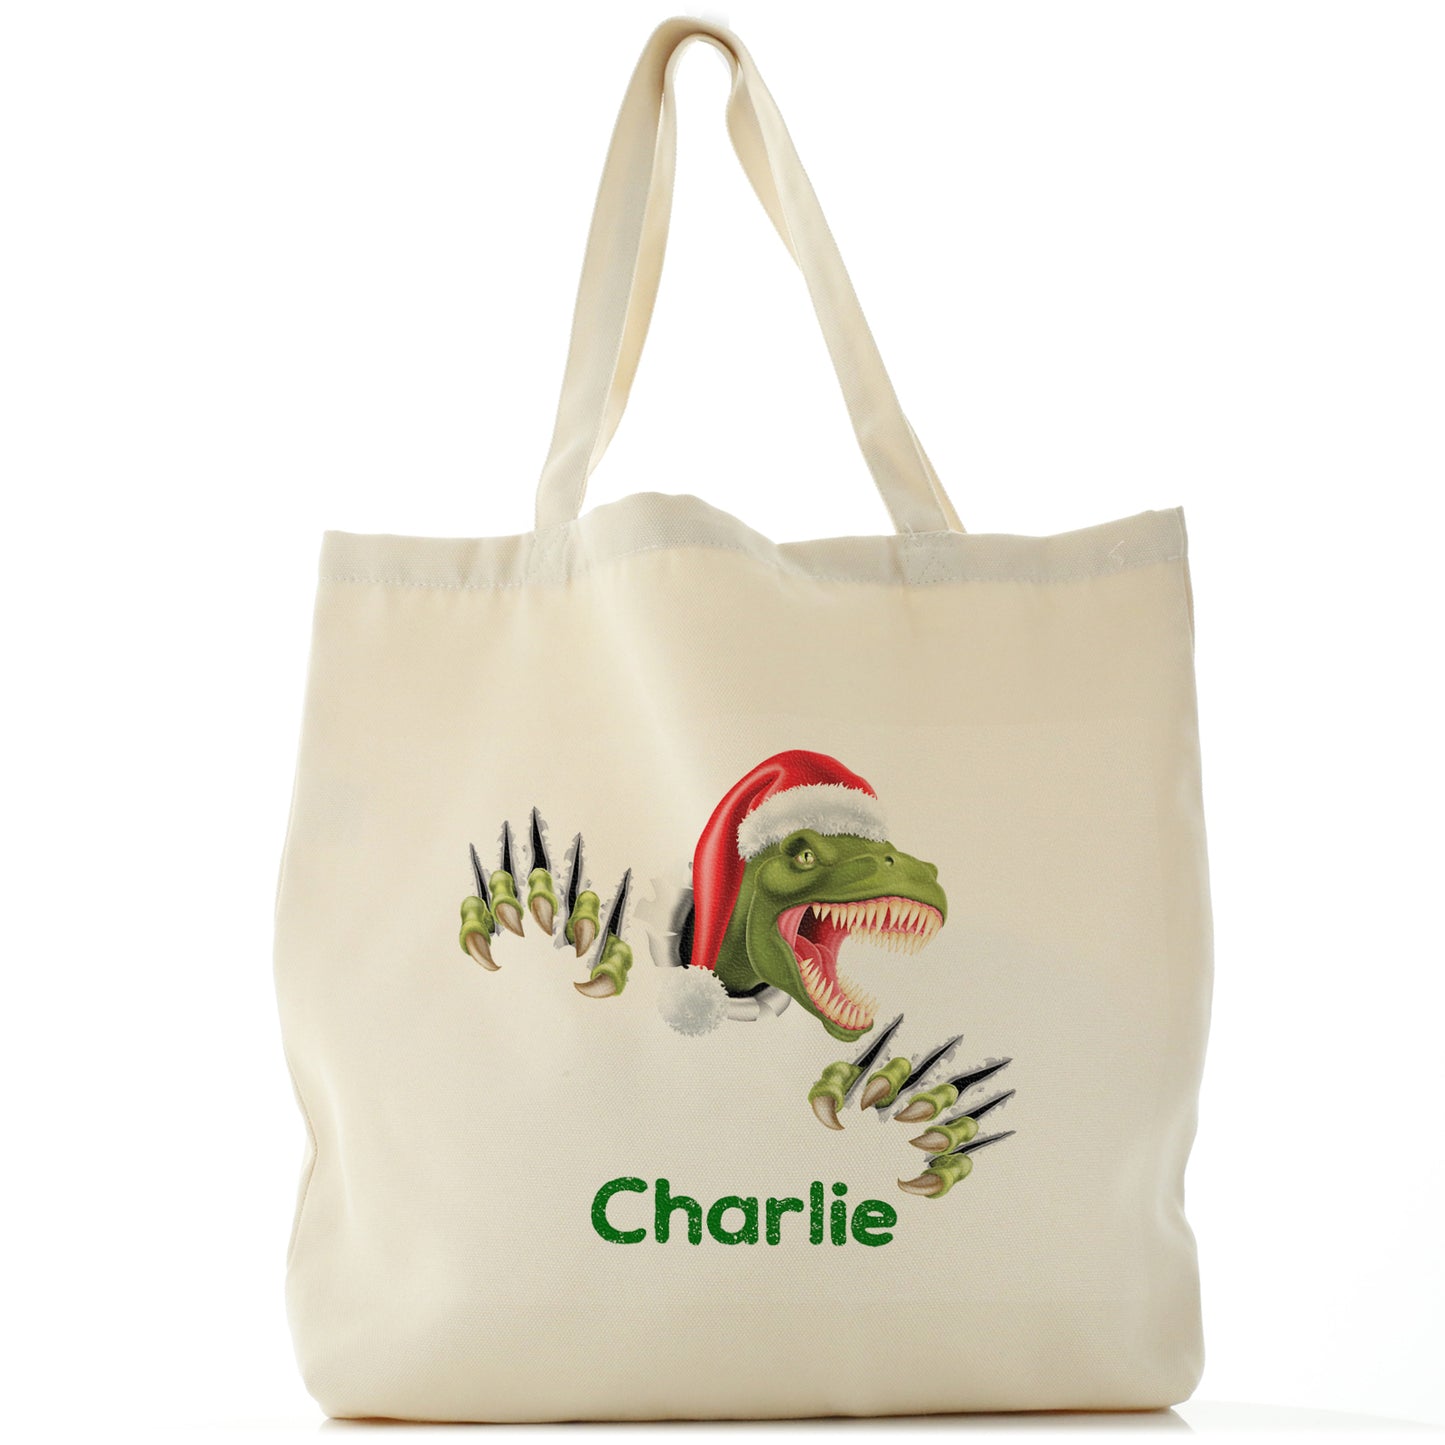 Personalised Canvas Tote Bag with Dino Text and Santa Hat Tearing Dinosaur